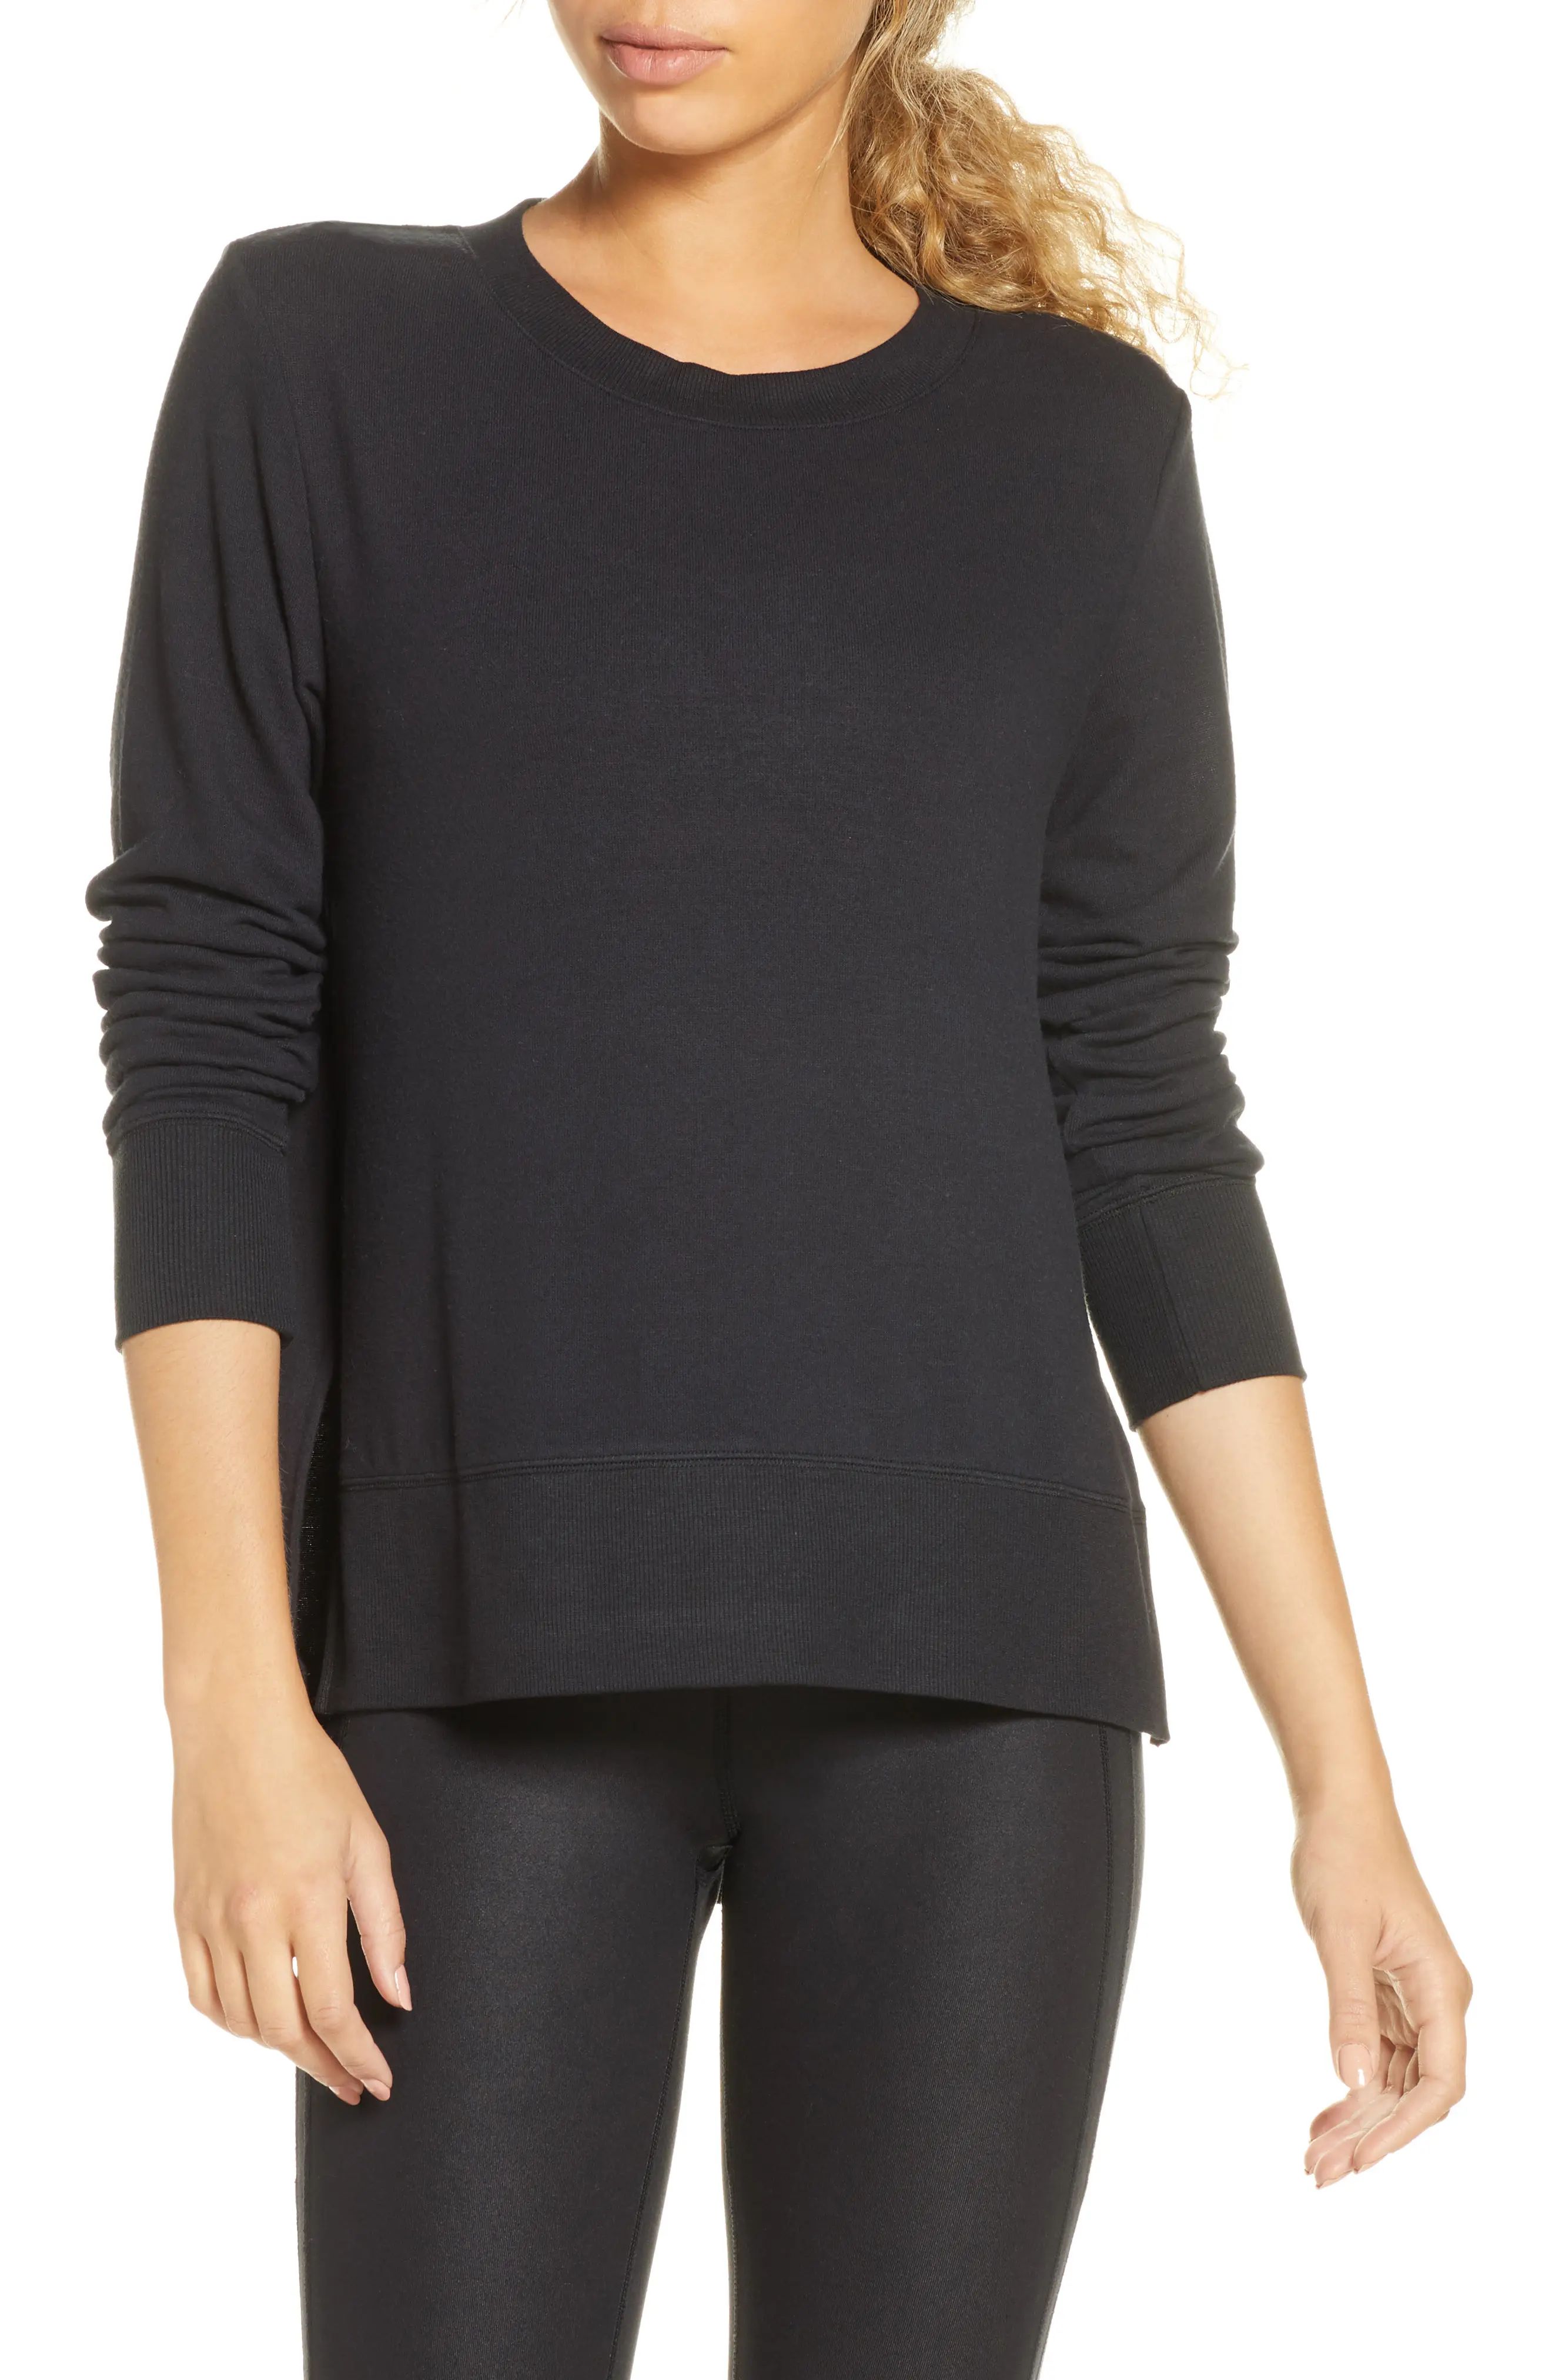 Alo 'Glimpse' Long Sleeve Top in Black at Nordstrom, Size Small | Nordstrom